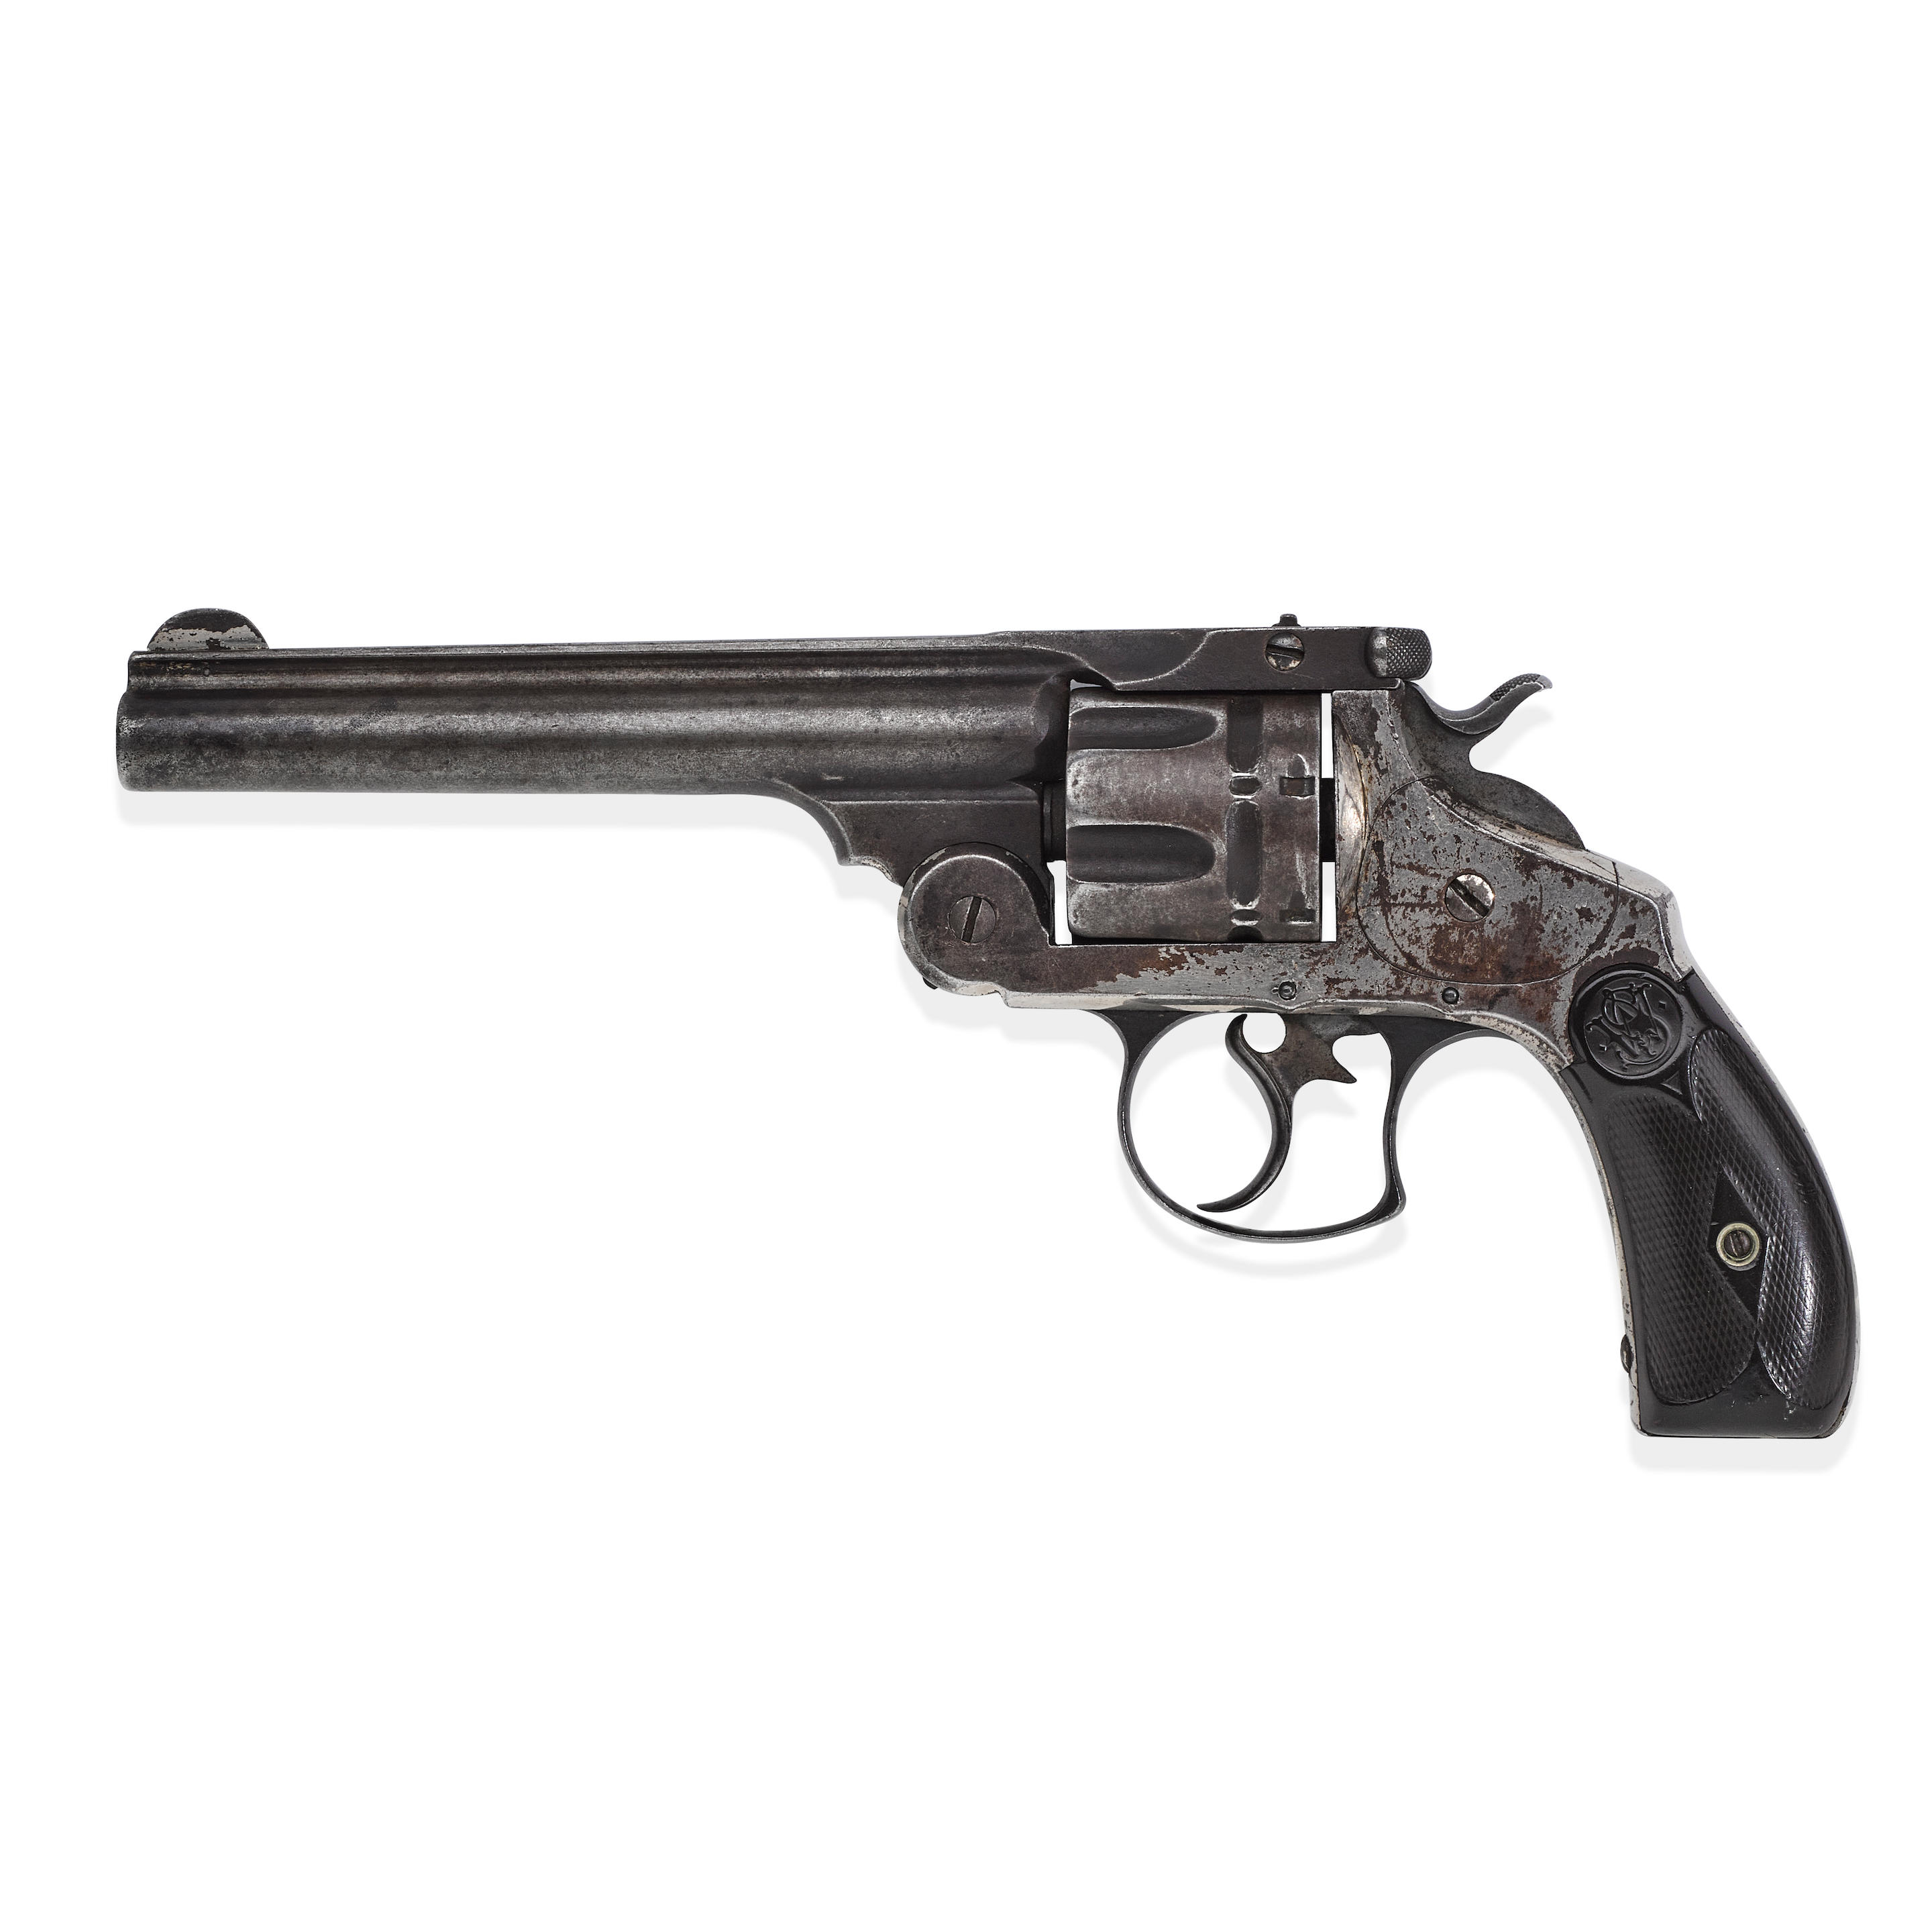 Bonhams : JOHN WESLEY HARDIN'S SMITH & WESSON DOUBLE ACTION FRONTIER  REVOLVER CARRIED WHEN HE WAS KILLED BY JOHN SELMAN. Serial no. 352, circa  1887, .44-40 caliber 6 inch barrel with two line address.